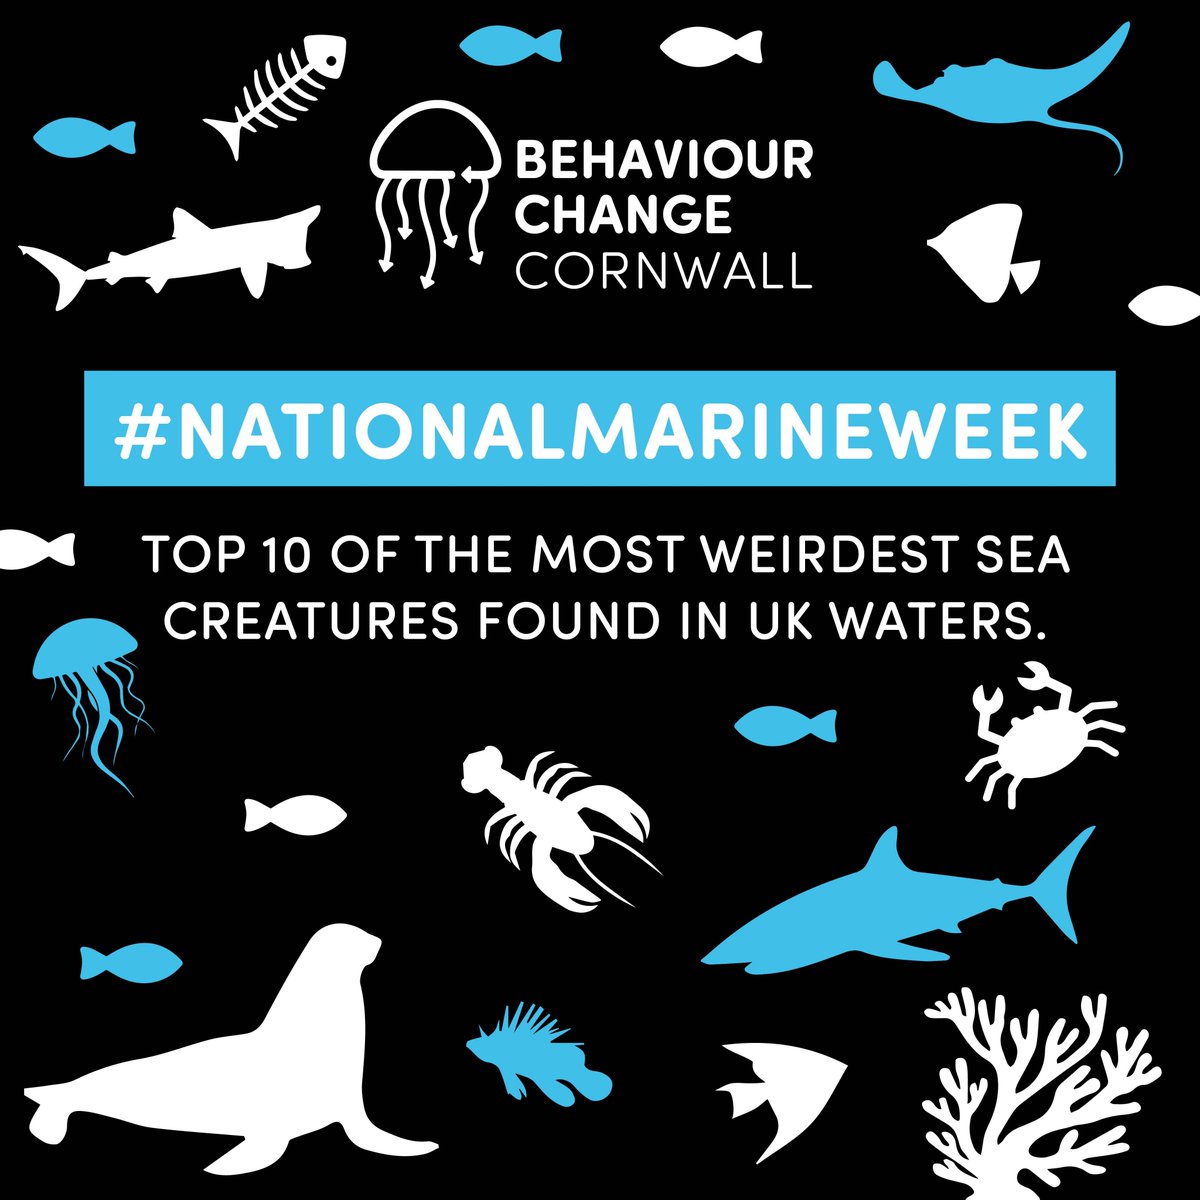 It's #NationalMarineWeek and we are celebrating the rich diversity of #marinespecies in our waters, highlighting the weirdest and most wonderful inhabitants of our coasts so we can more deeply appreciate our marine ecosystem.

Read the full article here: behaviourchangecornwall.co.uk/national-marin…